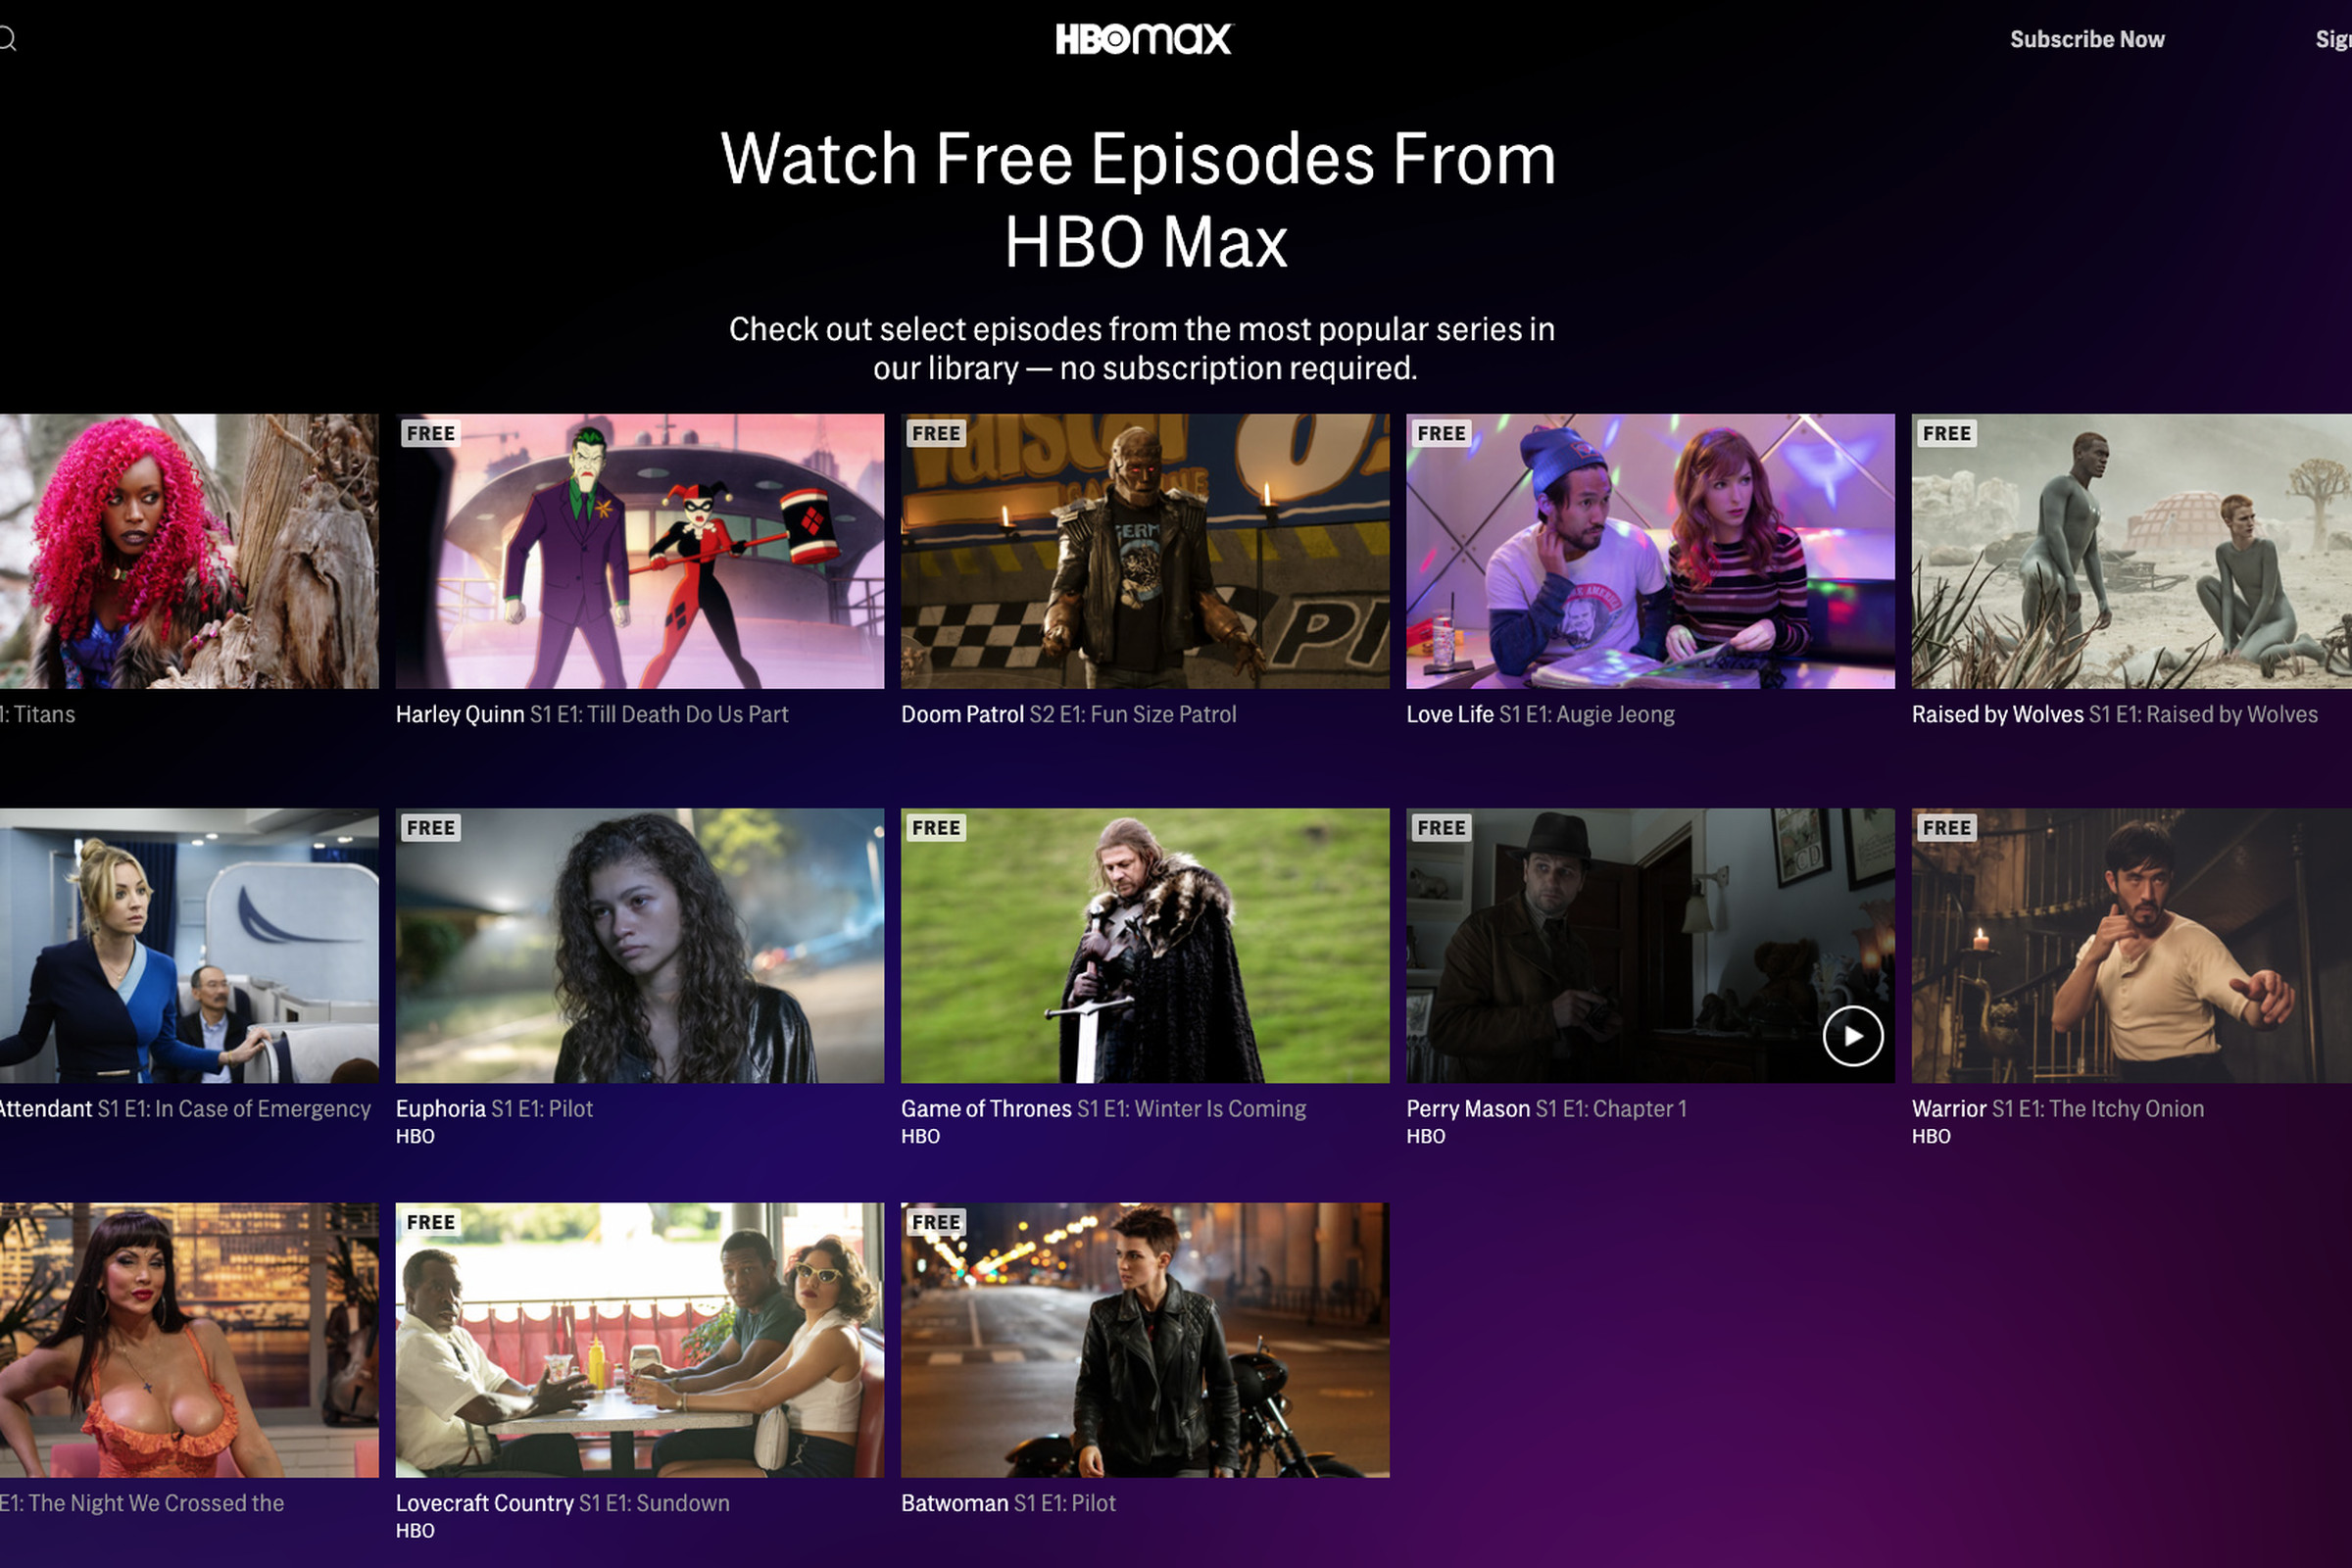 HBO Max is offering free content to potential users.